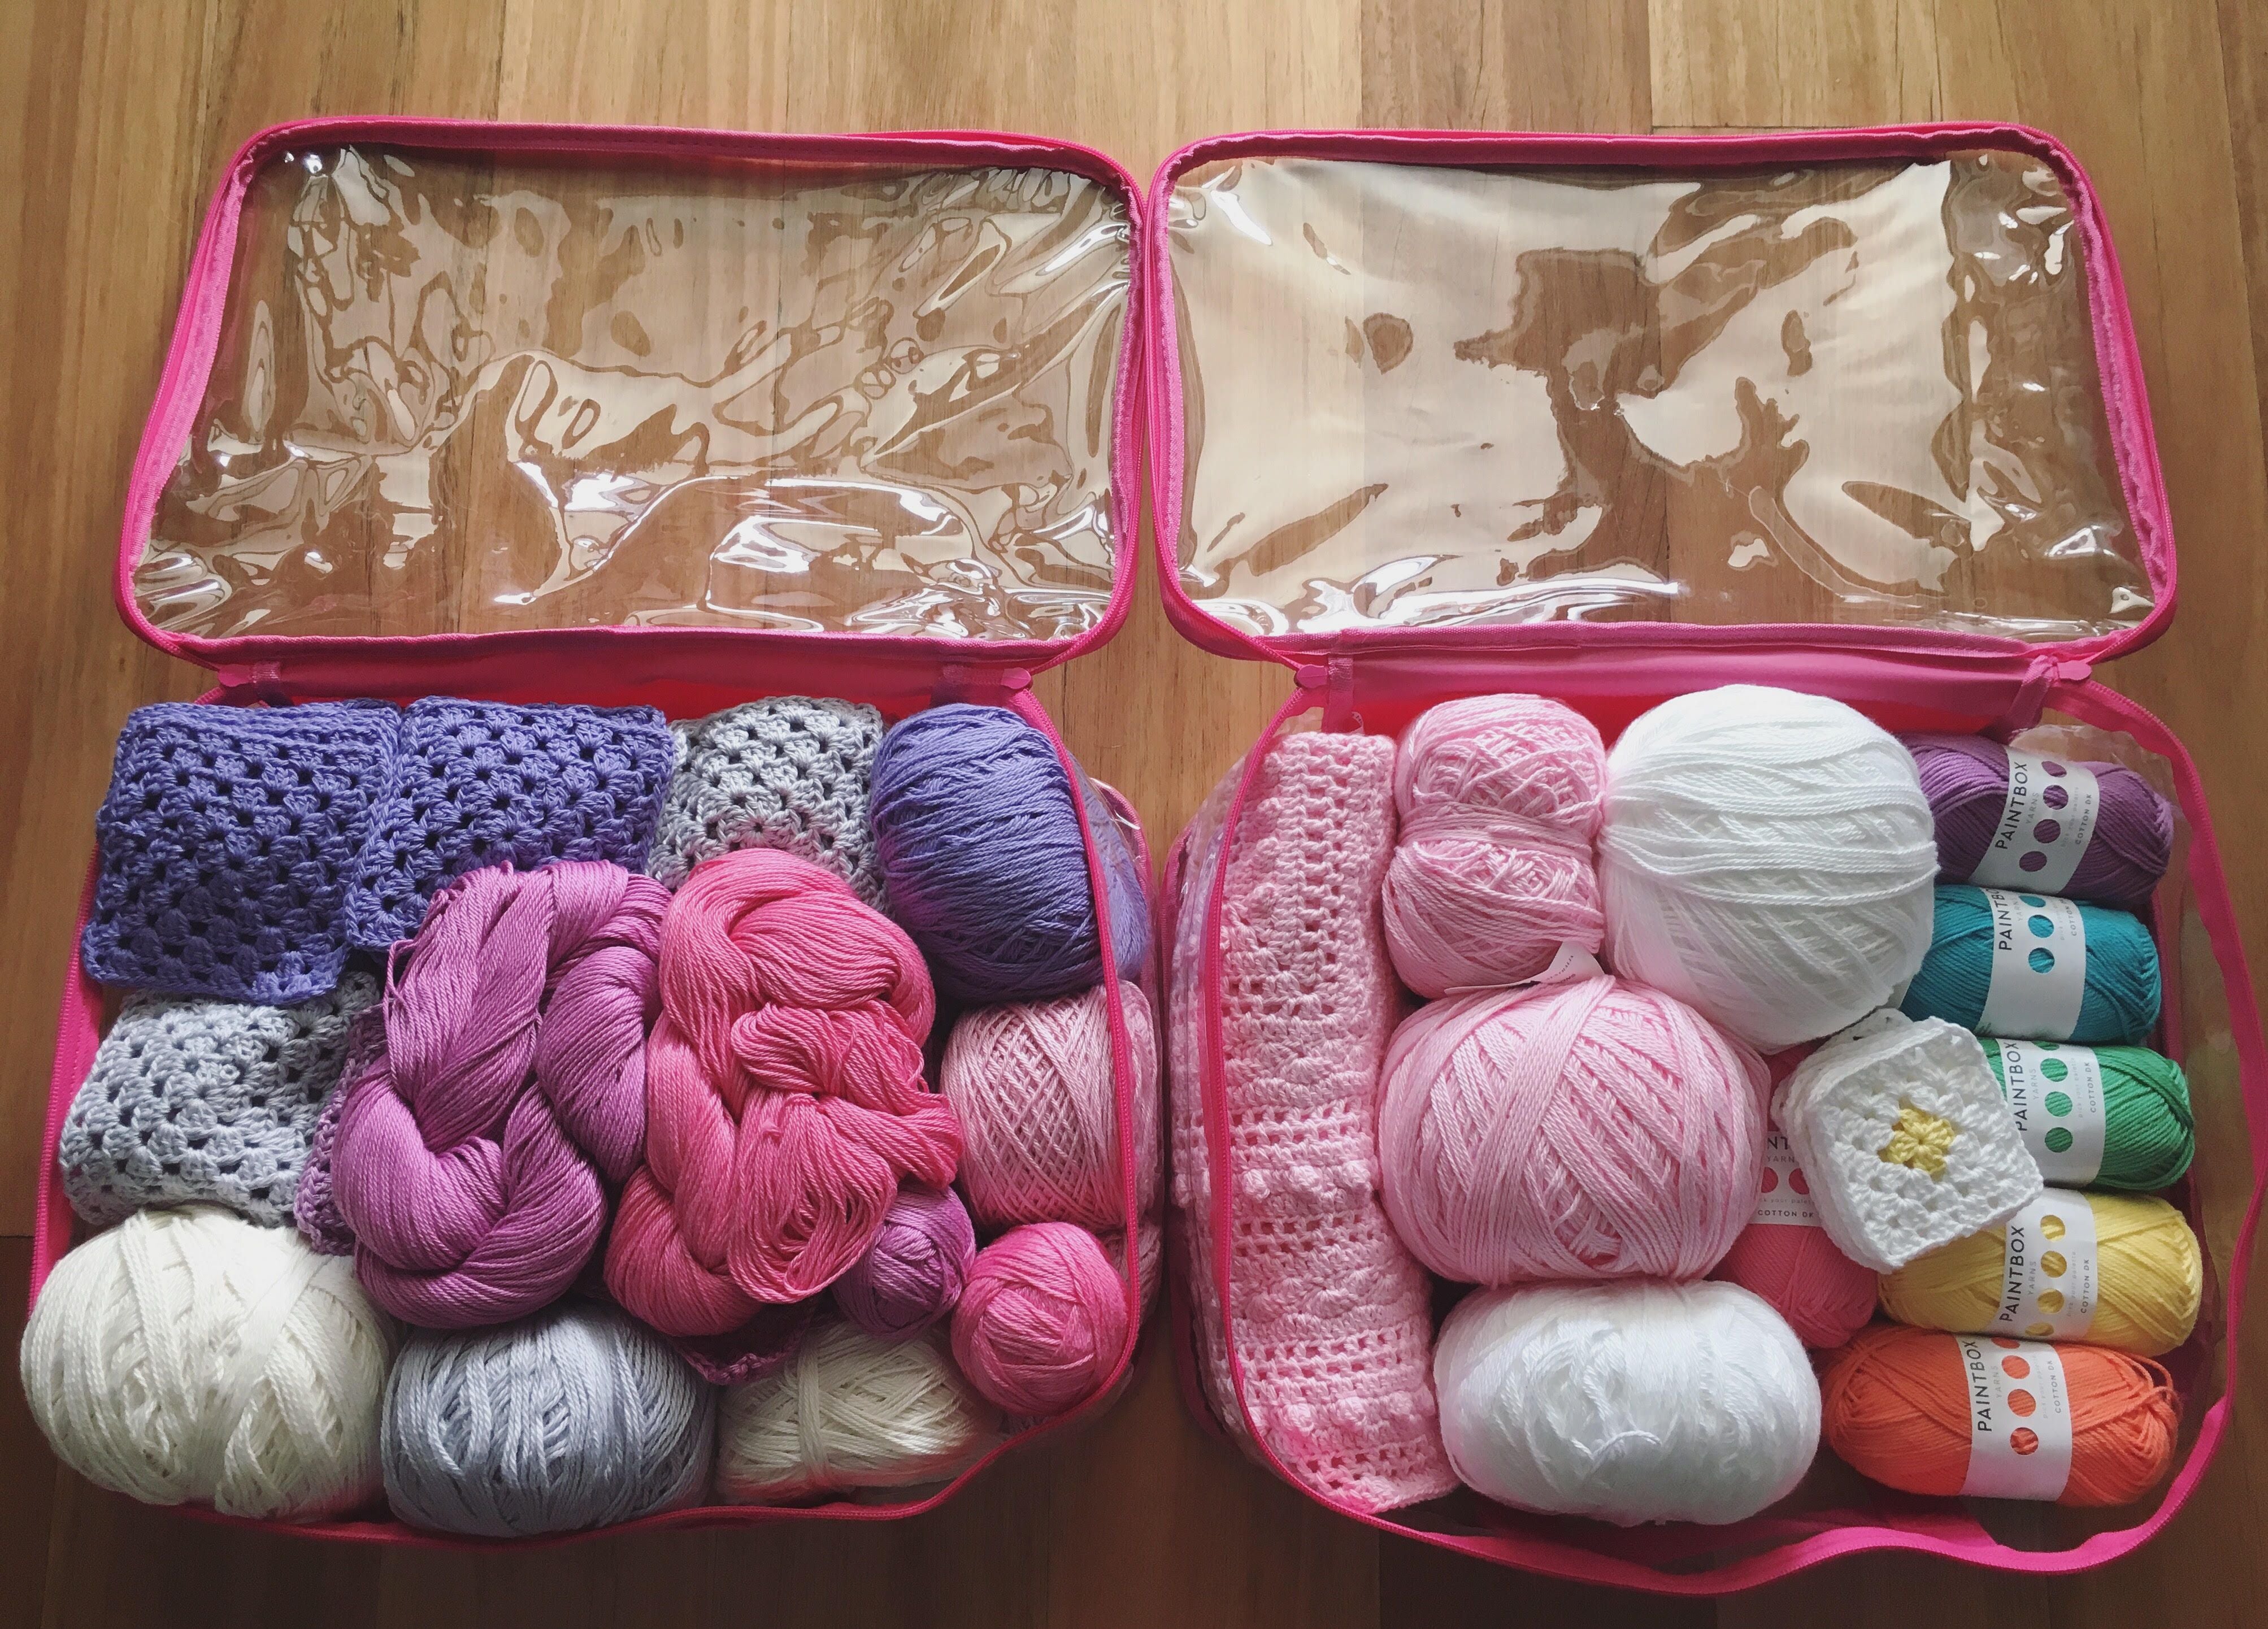 Organized colorful yarns in pink medium packing cubes